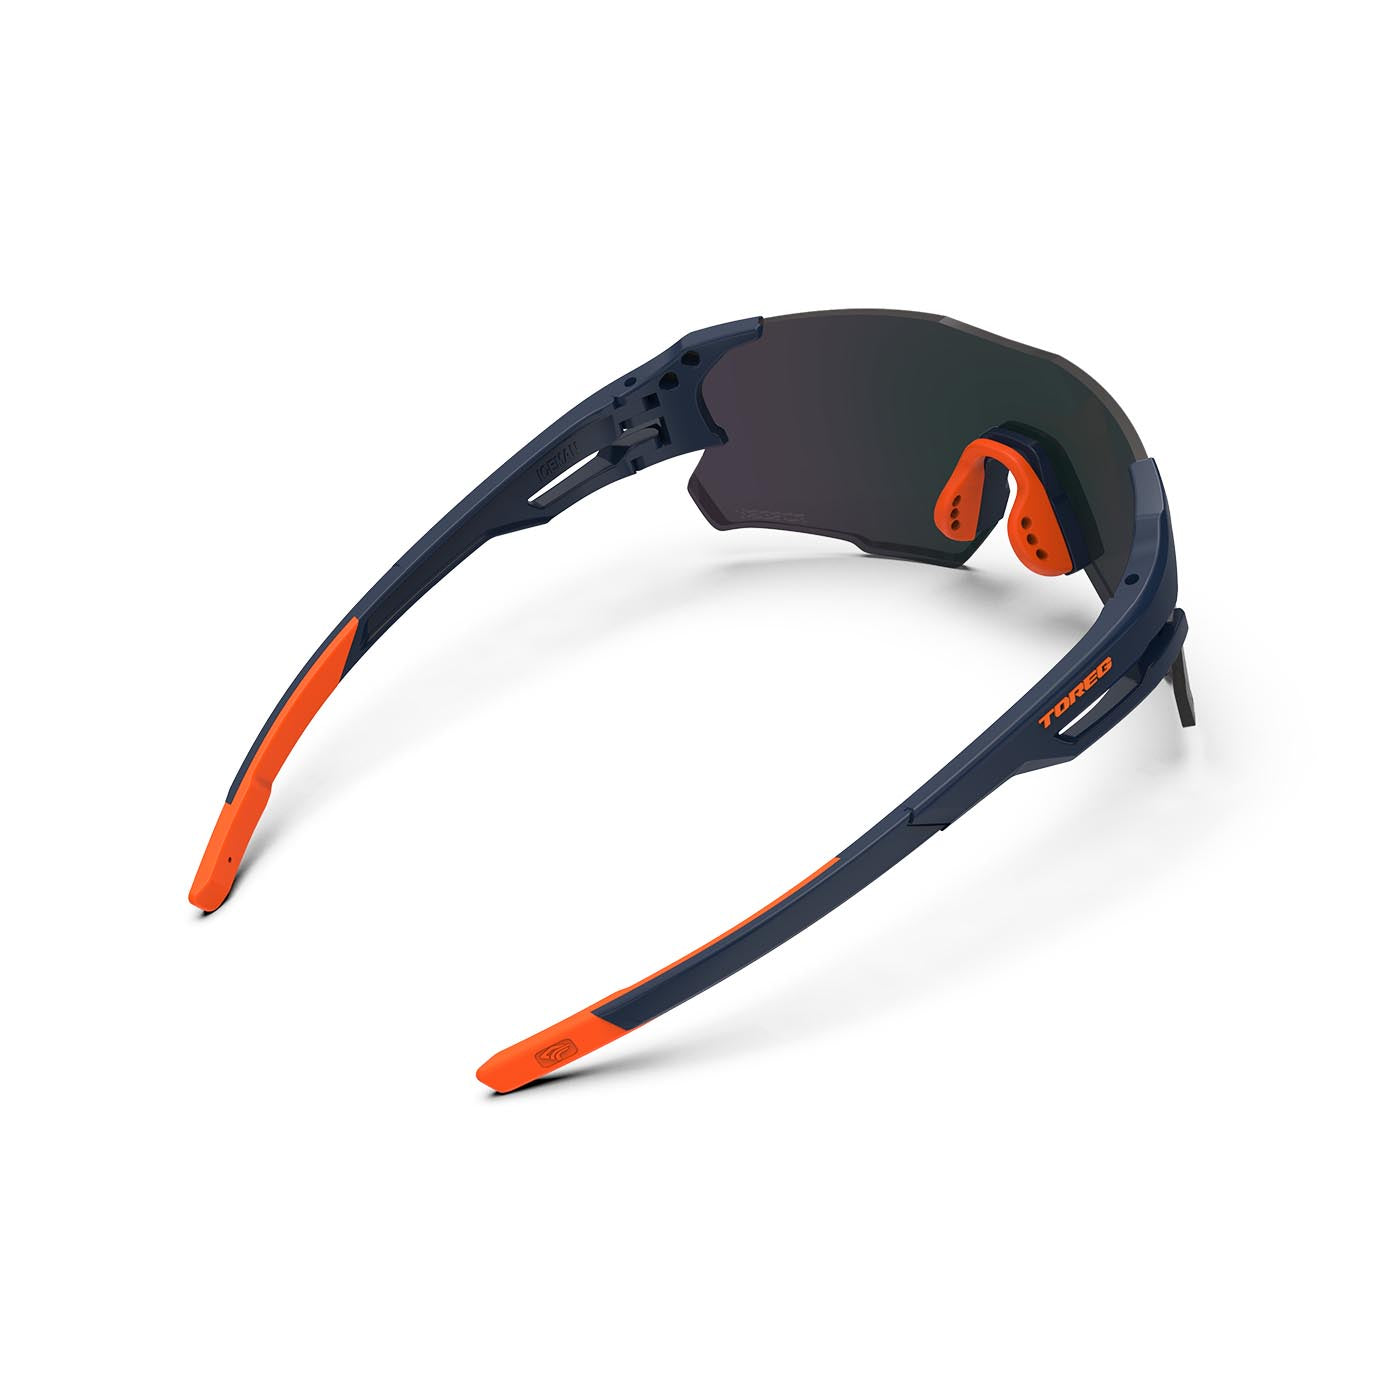 Tempation Ultra Lightweight Wraparound Sport Sunglasses for Active Men and  Women With Lifetime Warranty - Perfect for Cycling, Hiking, Fishing, Golf,  and Running - Matte Blue Frame & Sunlight Orange Lens